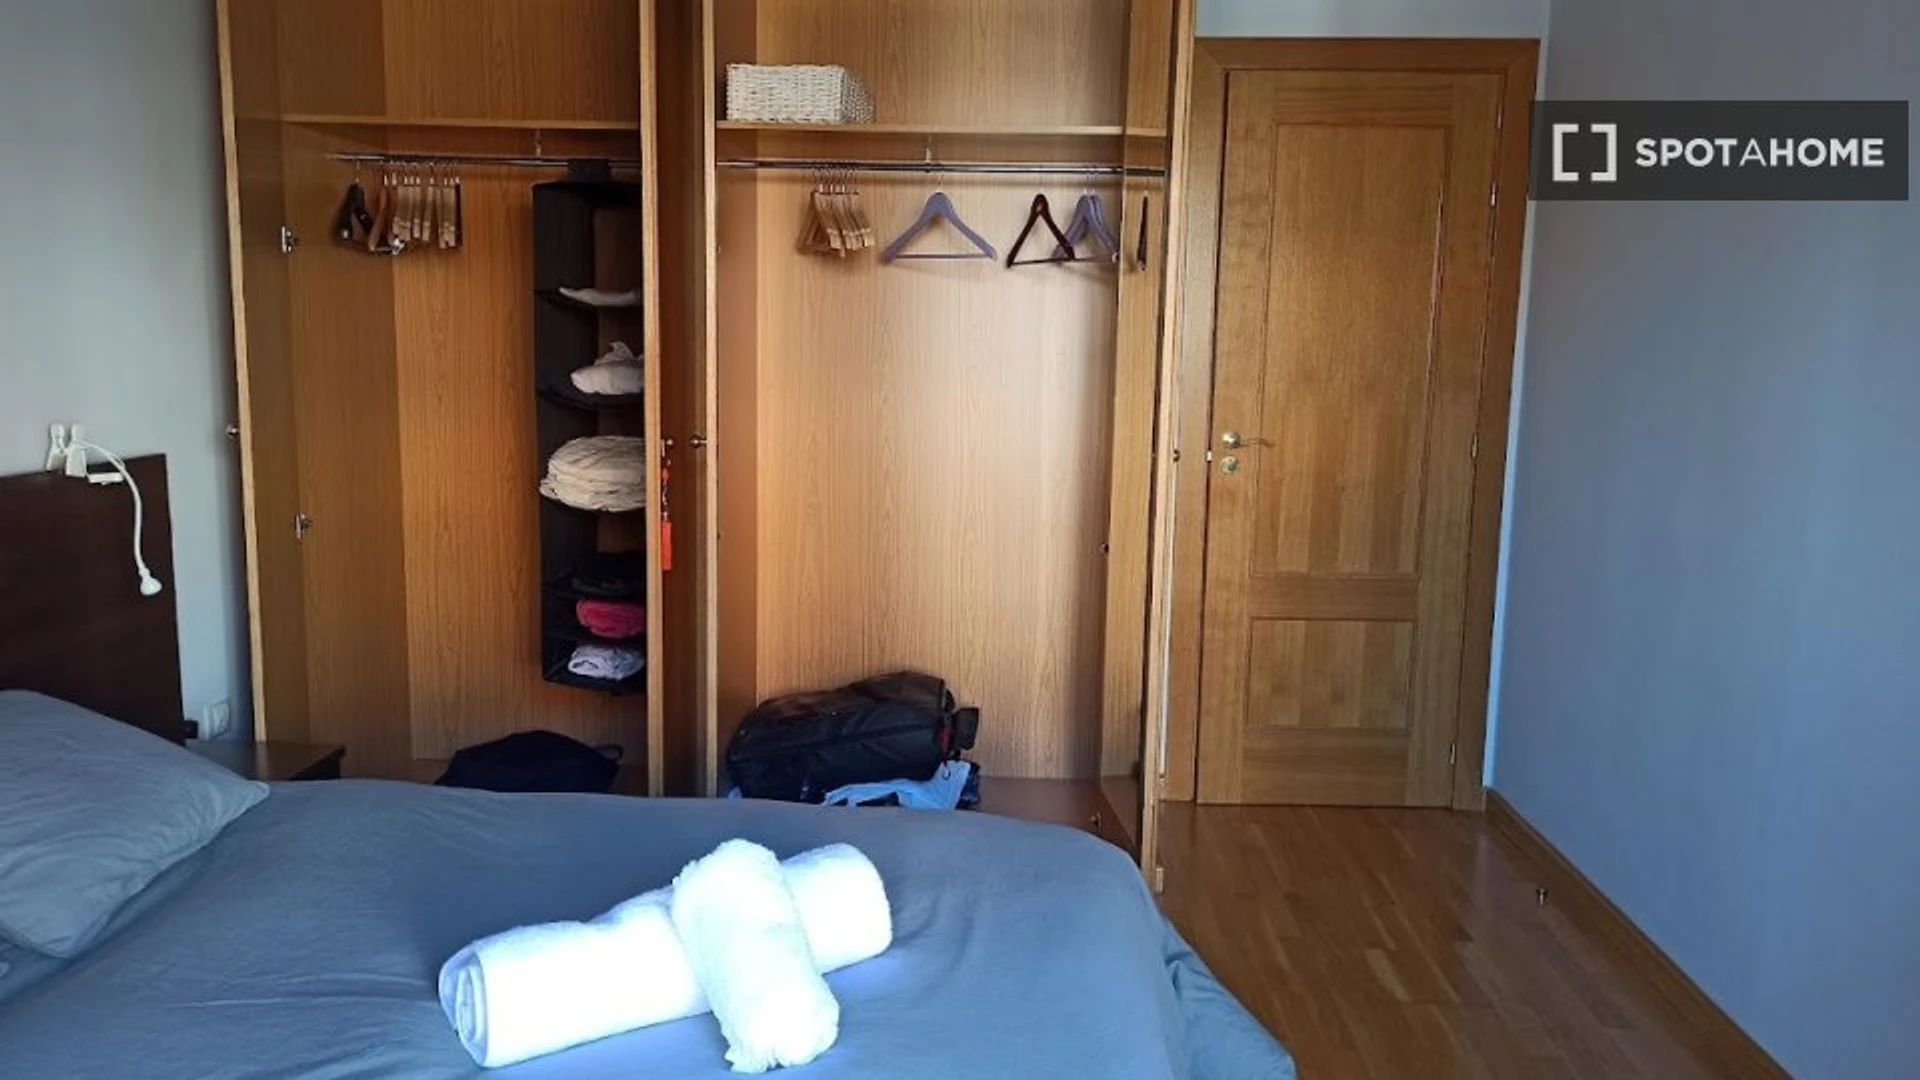 Accommodation in the centre of Valladolid